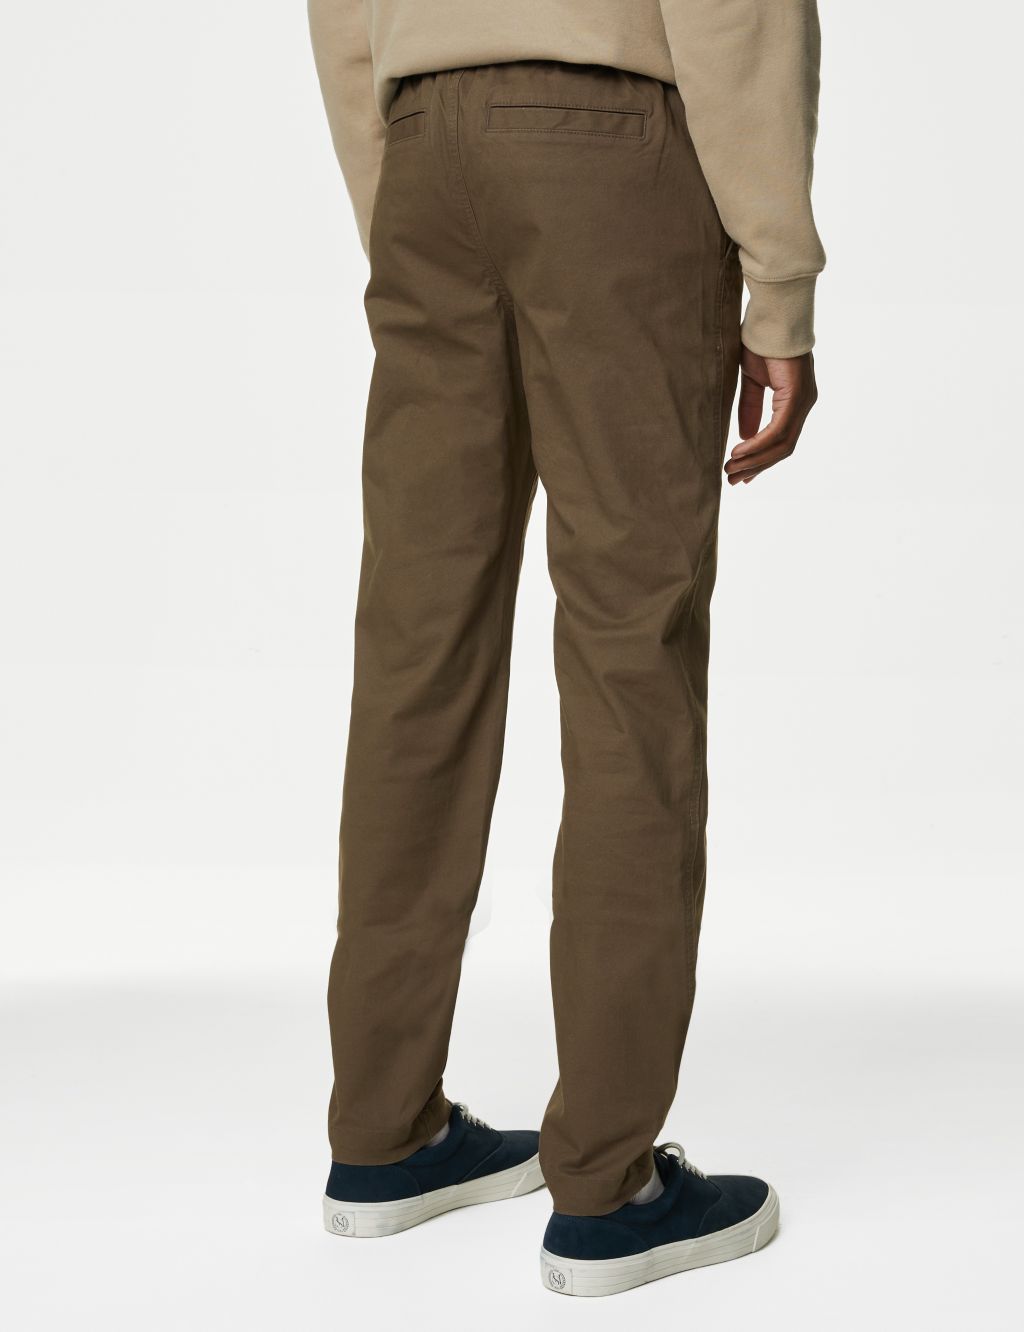 Tapered Fit Woven Stretch Trousers image 5